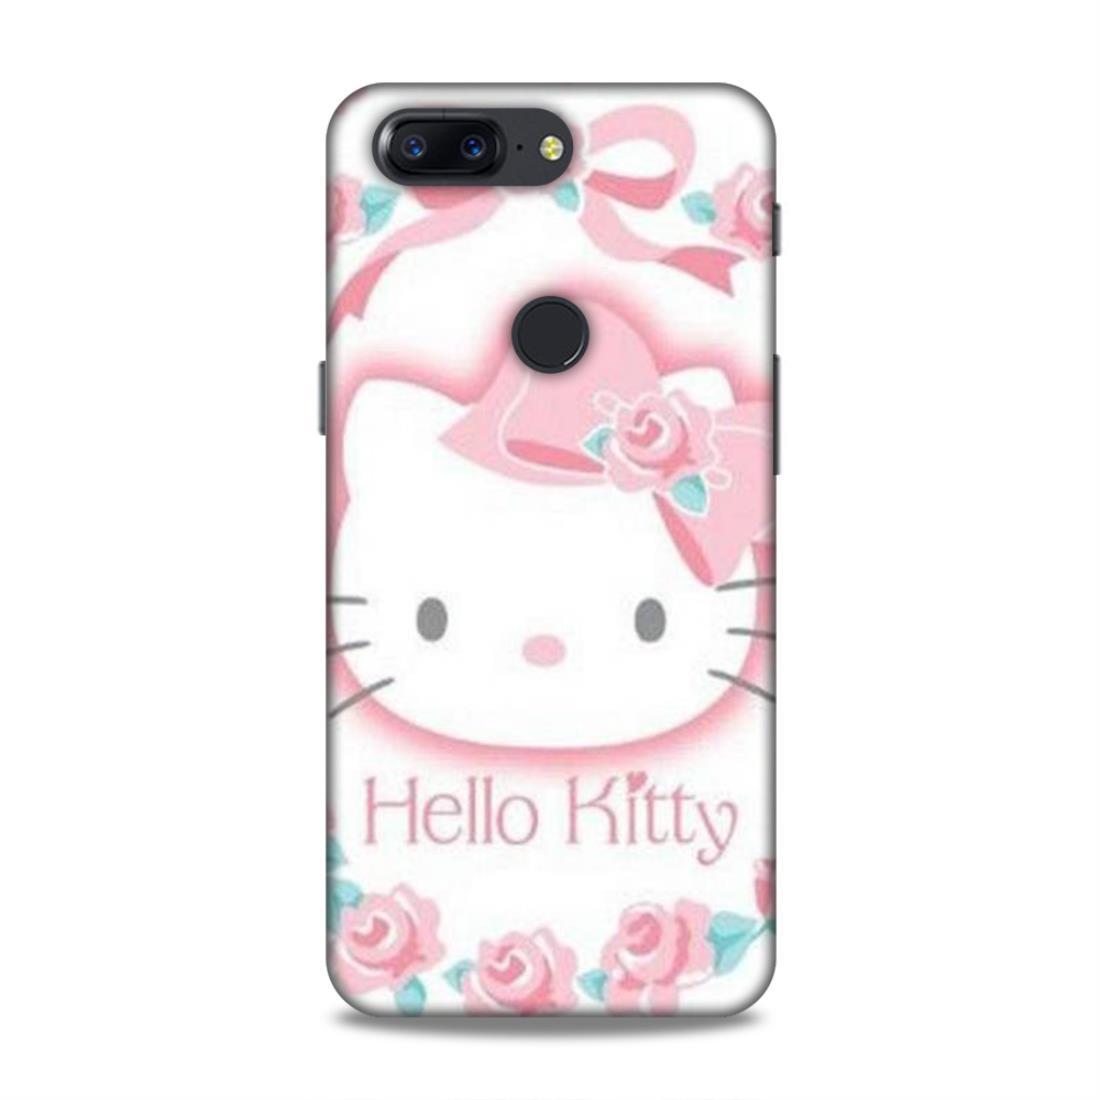 Hellow Kitty Pink OnePlus 5T Phone Cover Case